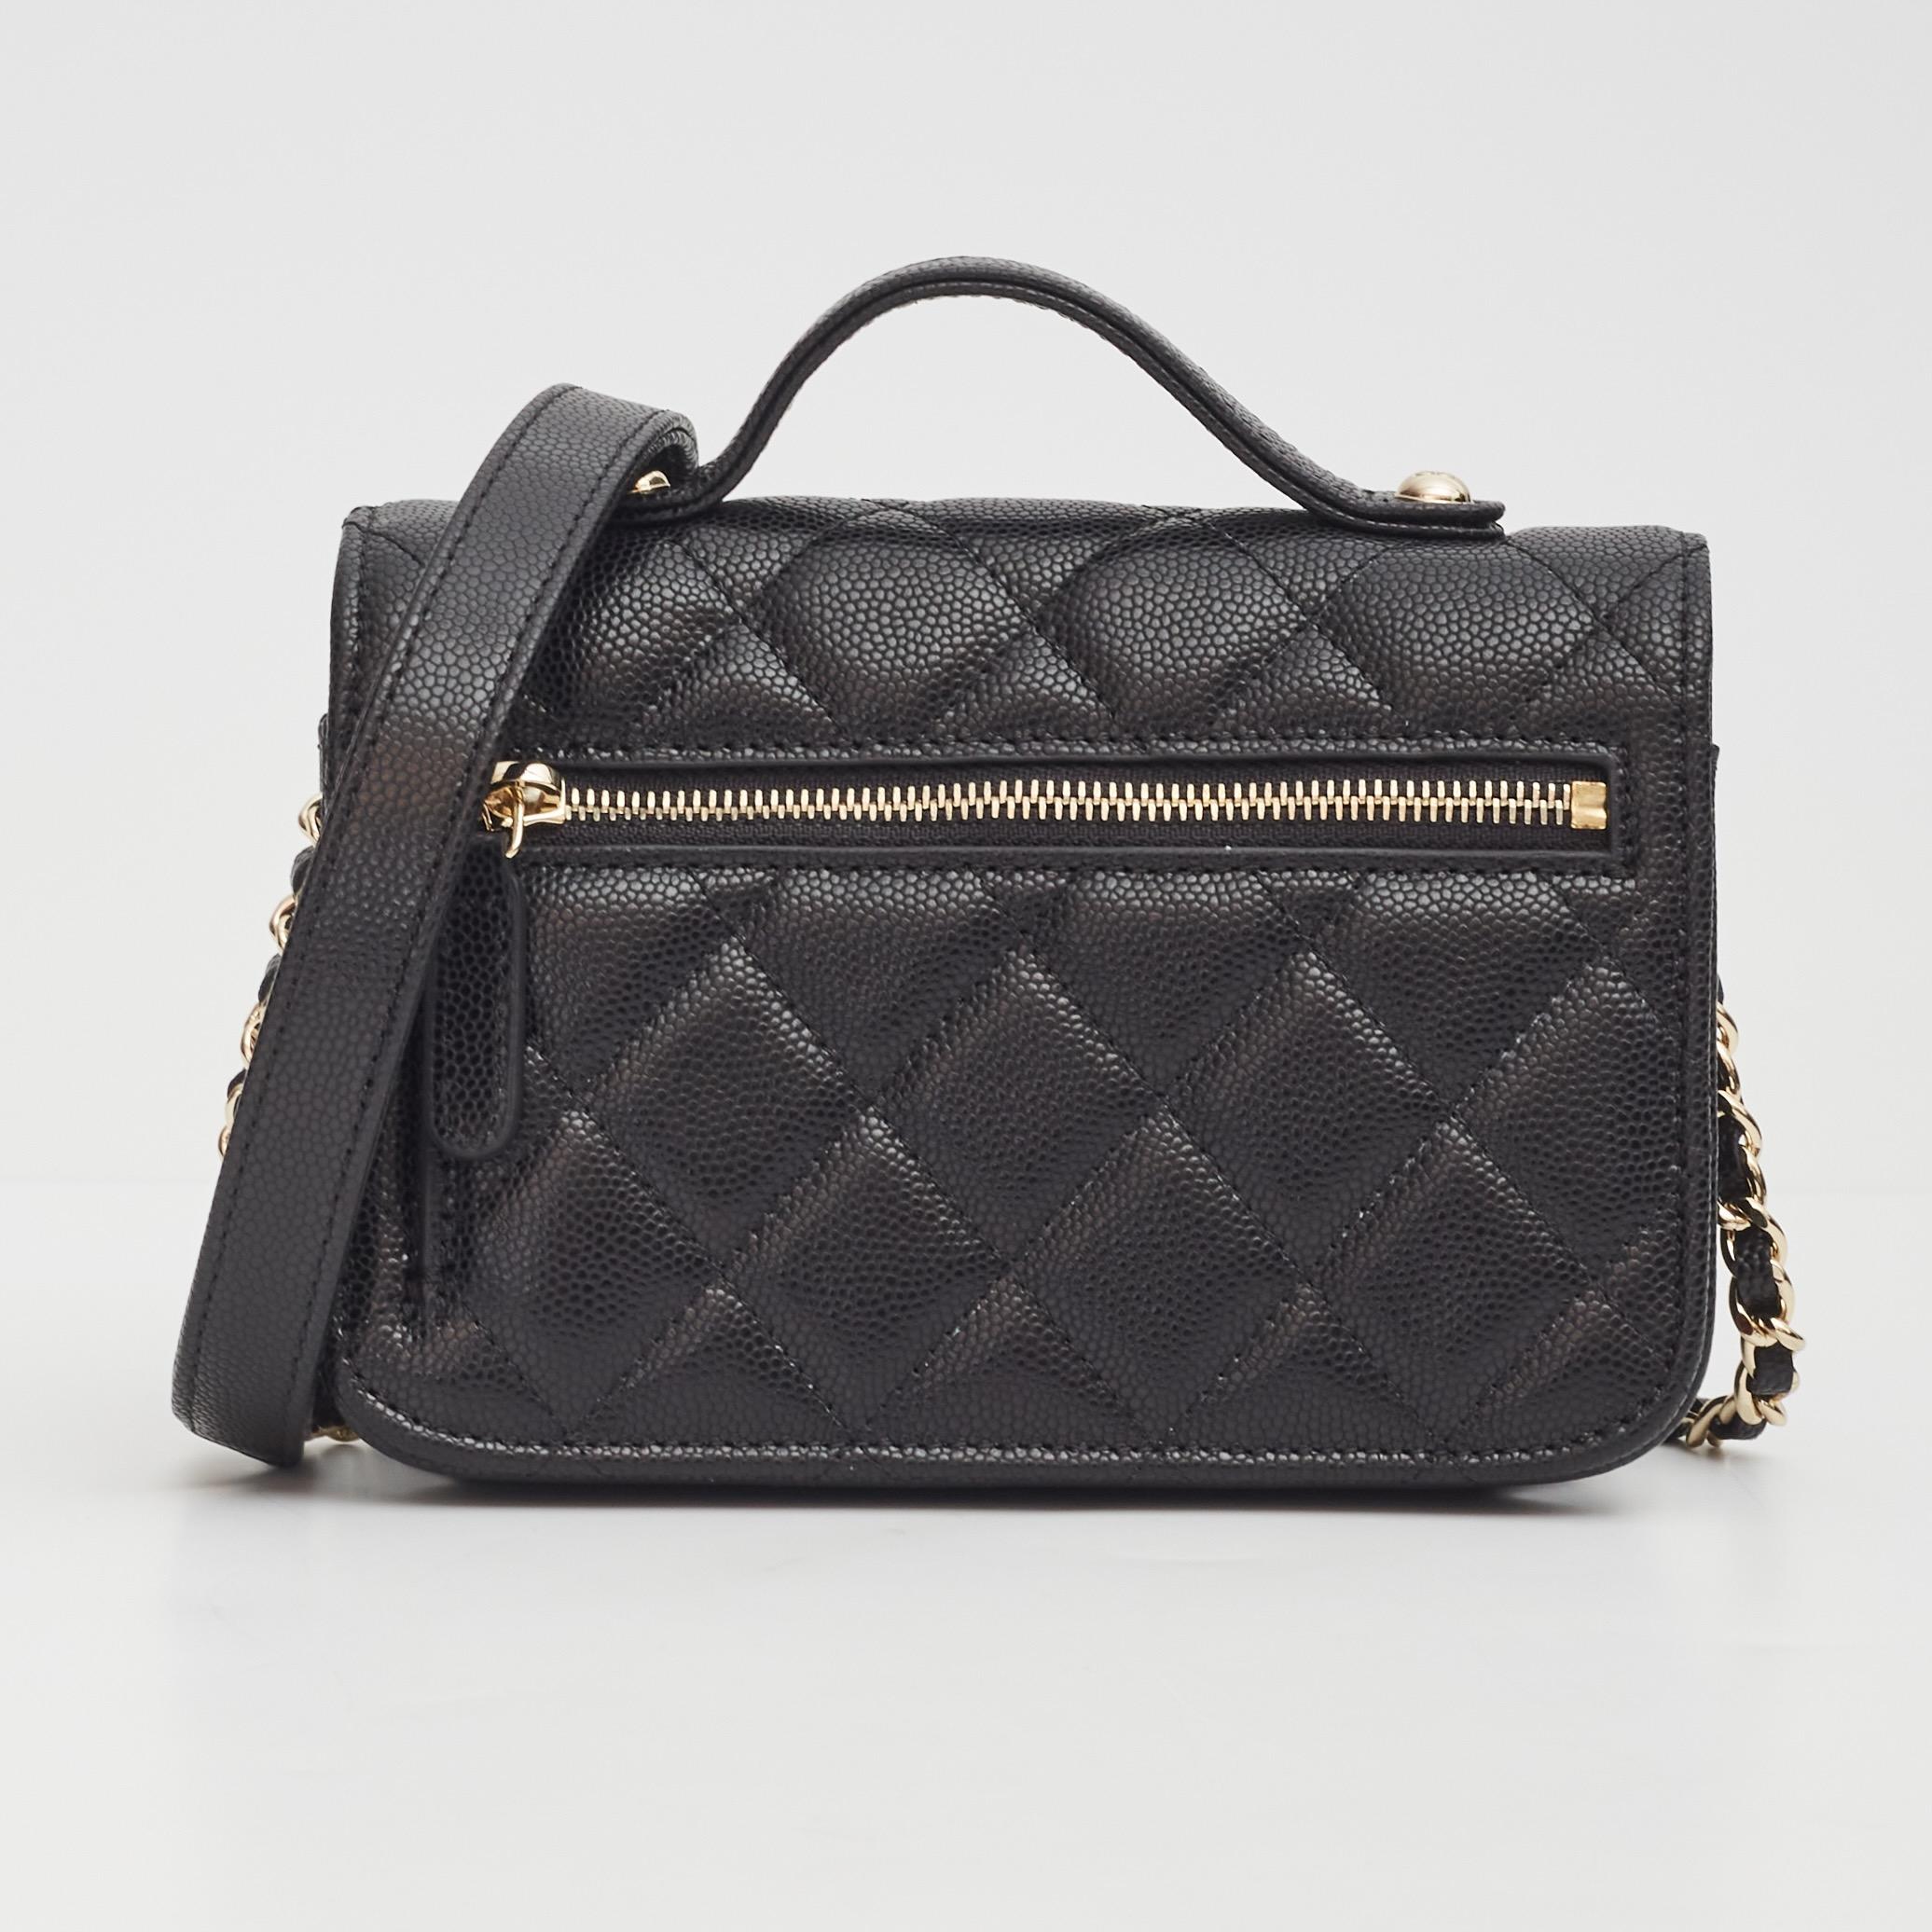 This classic Chanel bag is made with black caviar leather. The bag features a sturdy black leather top handle, a signature interlocking CC logo at face, a shoulder strap of a light gold tone chain interlaced with leather, a rear zip pocket and a